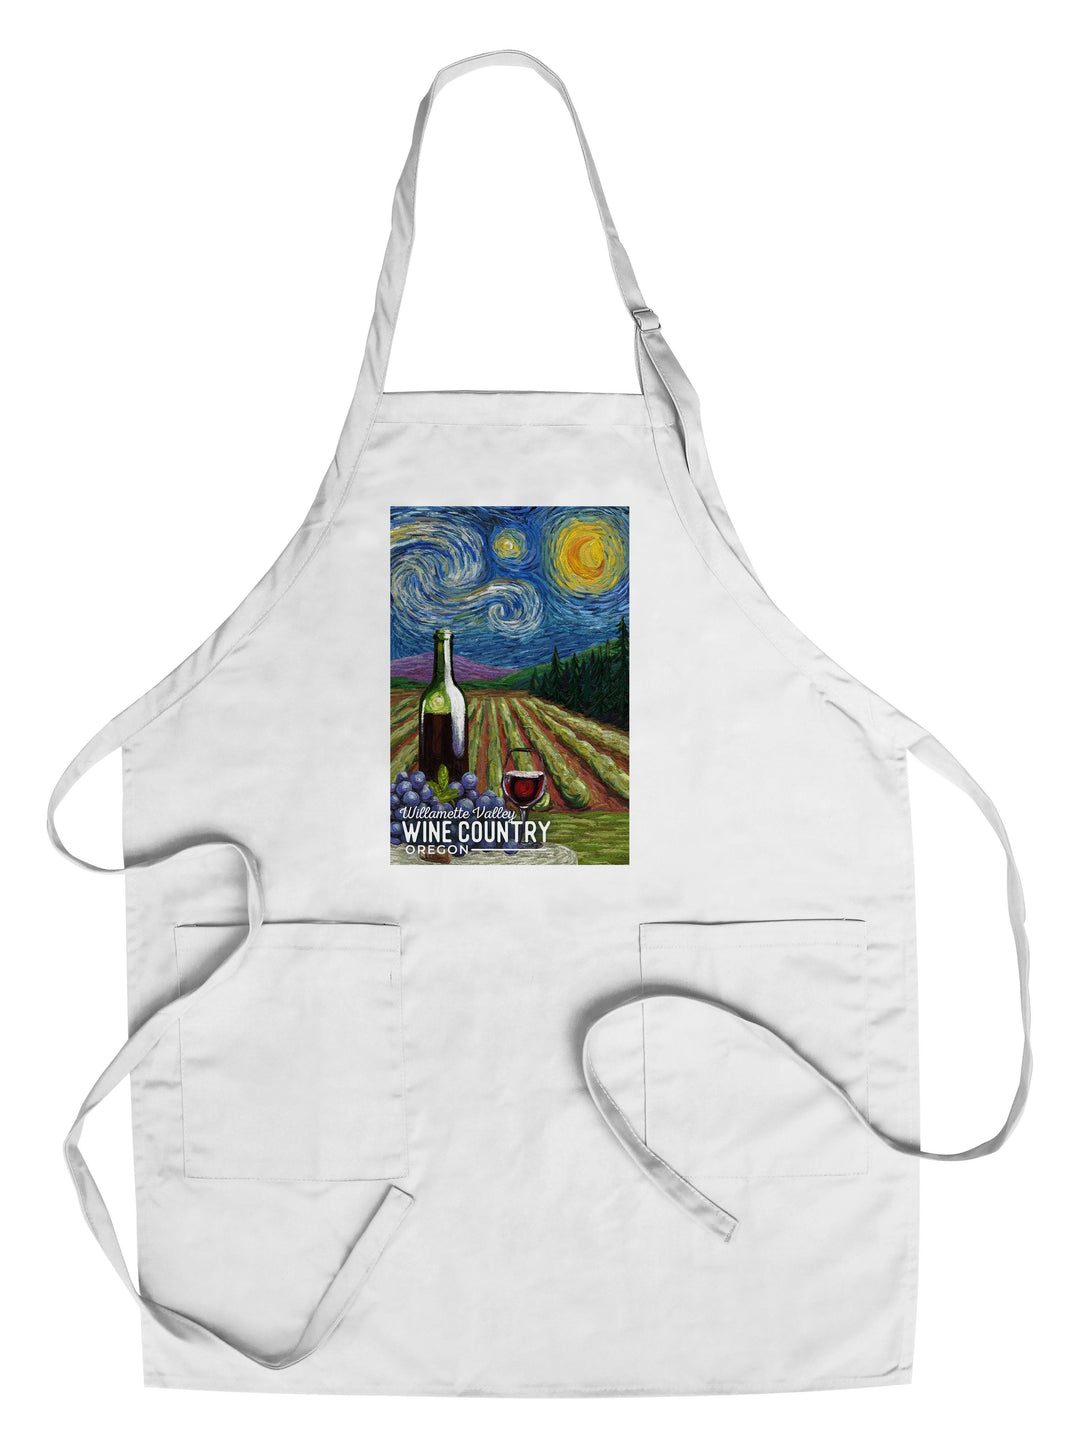 Willamette Valley, Oregon, Wine Country, Starry Night, Lantern Press Artwork, Towels and Aprons Kitchen Lantern Press Chef's Apron 